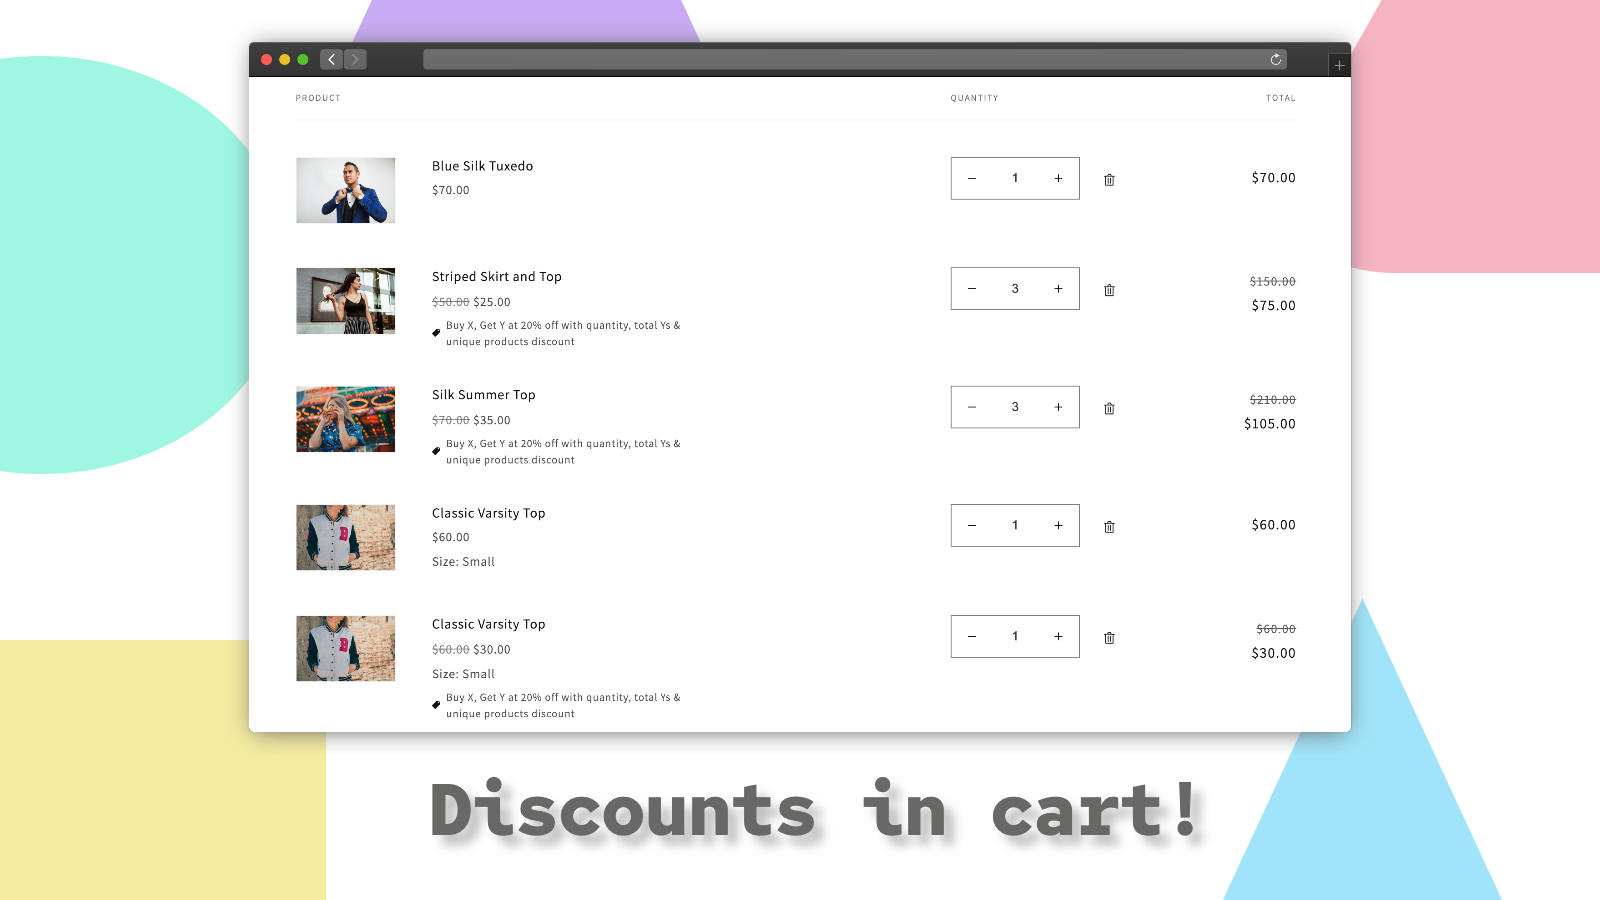 Auto discounts on cart page.